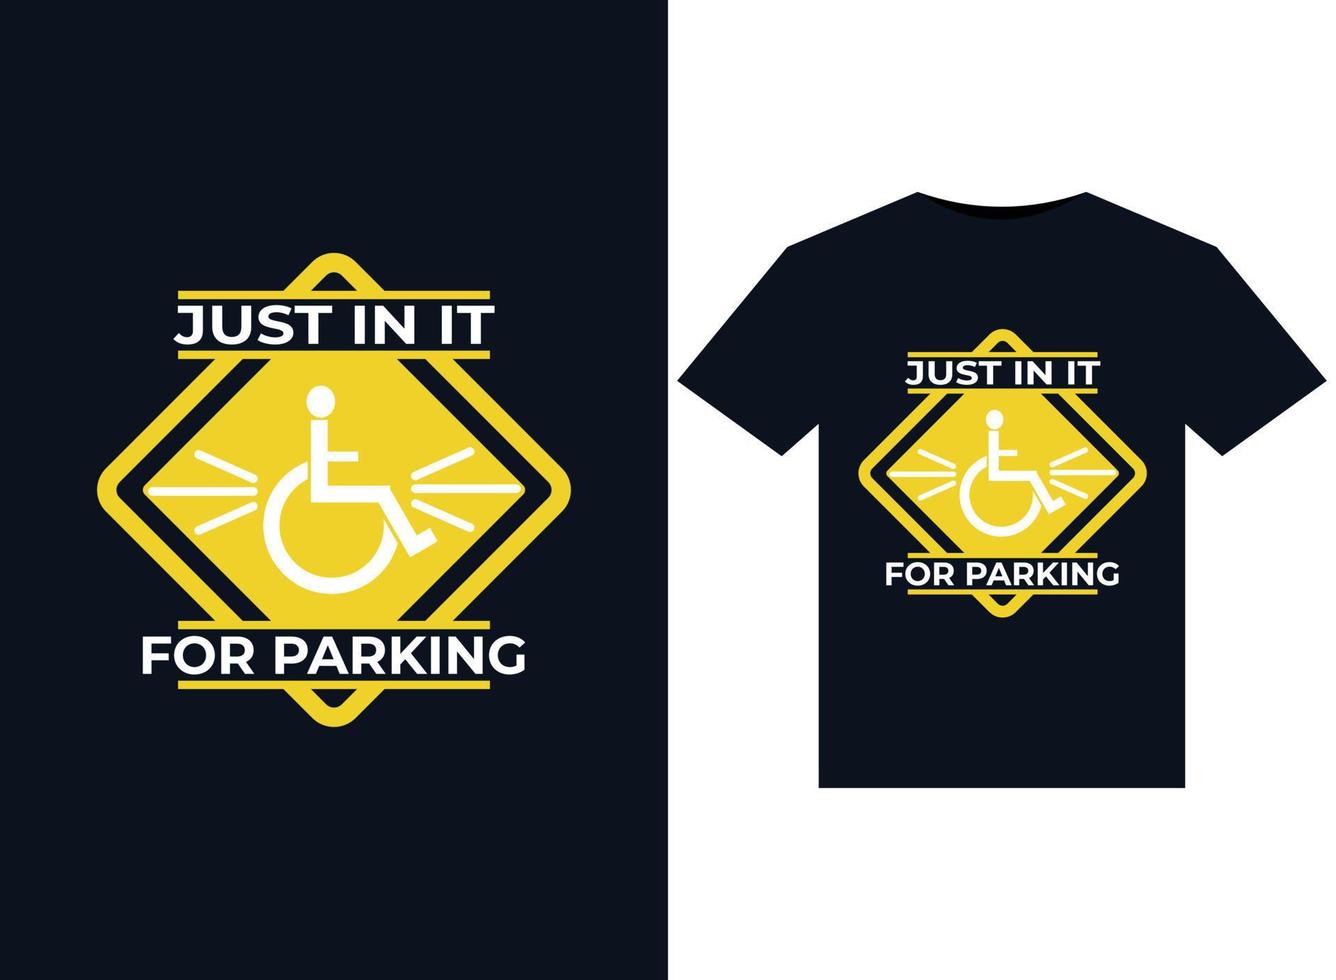 Just In It For Parking illustrations for print-ready T-Shirts design vector